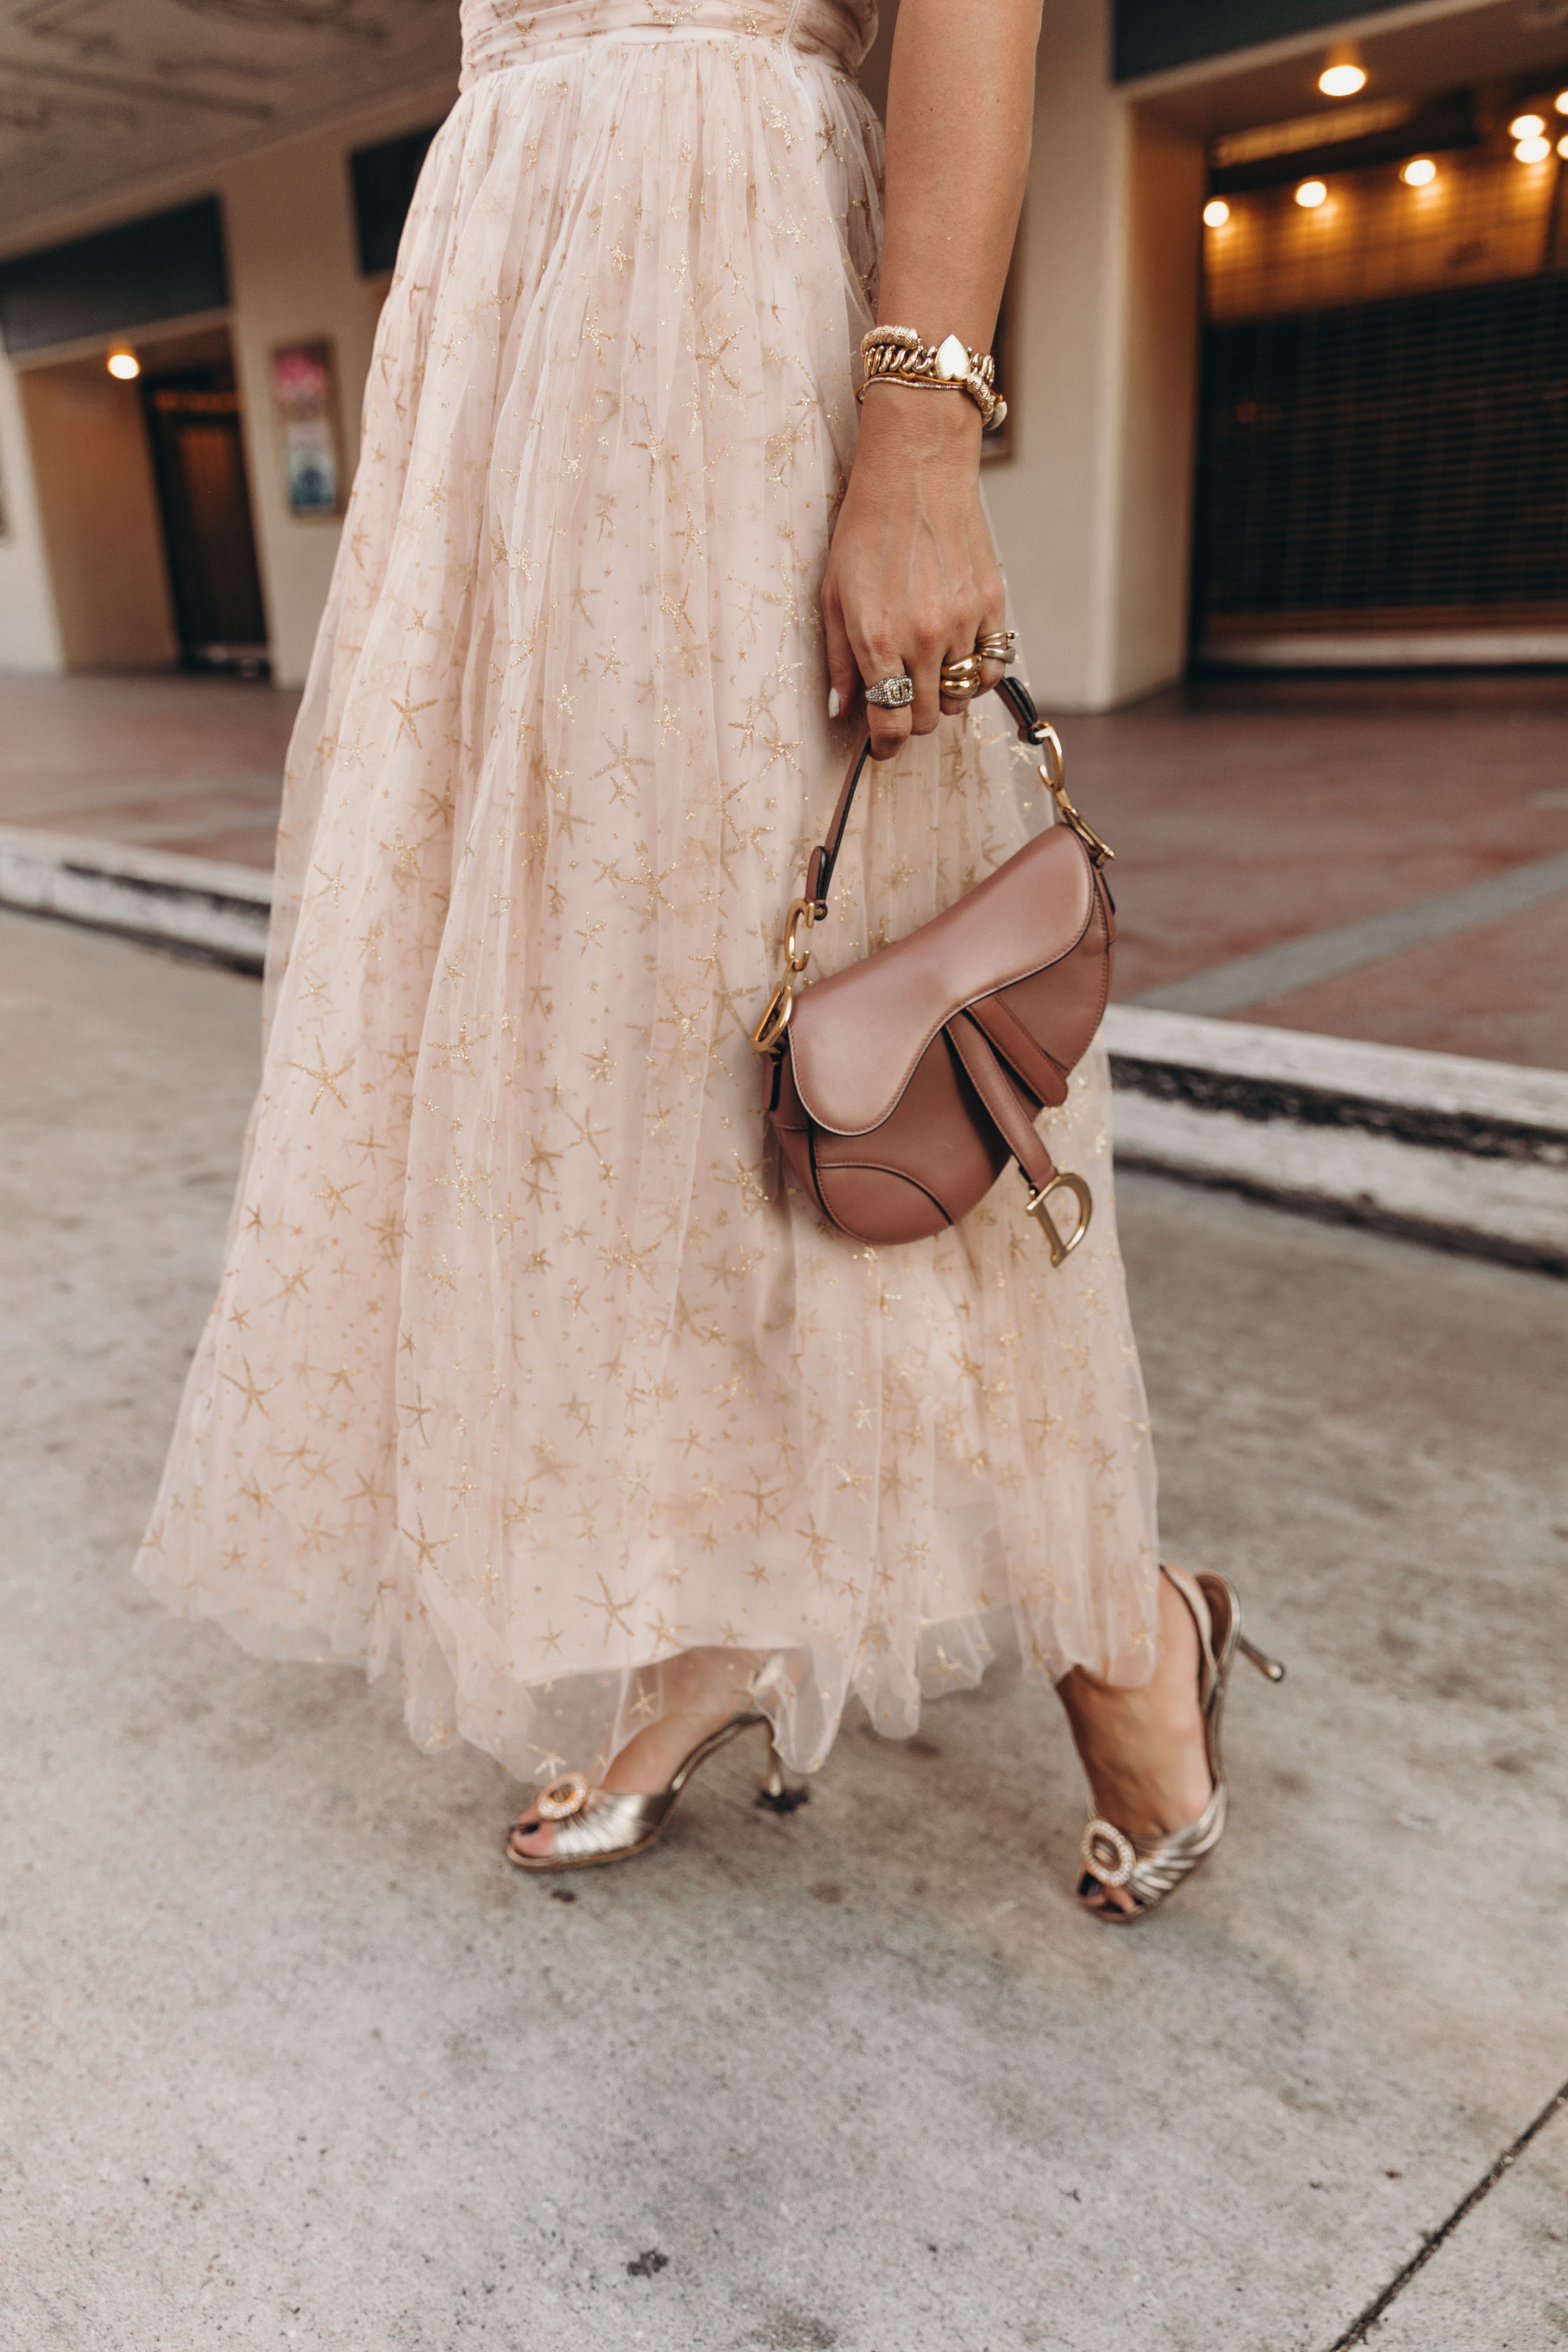 Party outfit wearing a Champagne tulle dress and Manolo Blahnik sandals